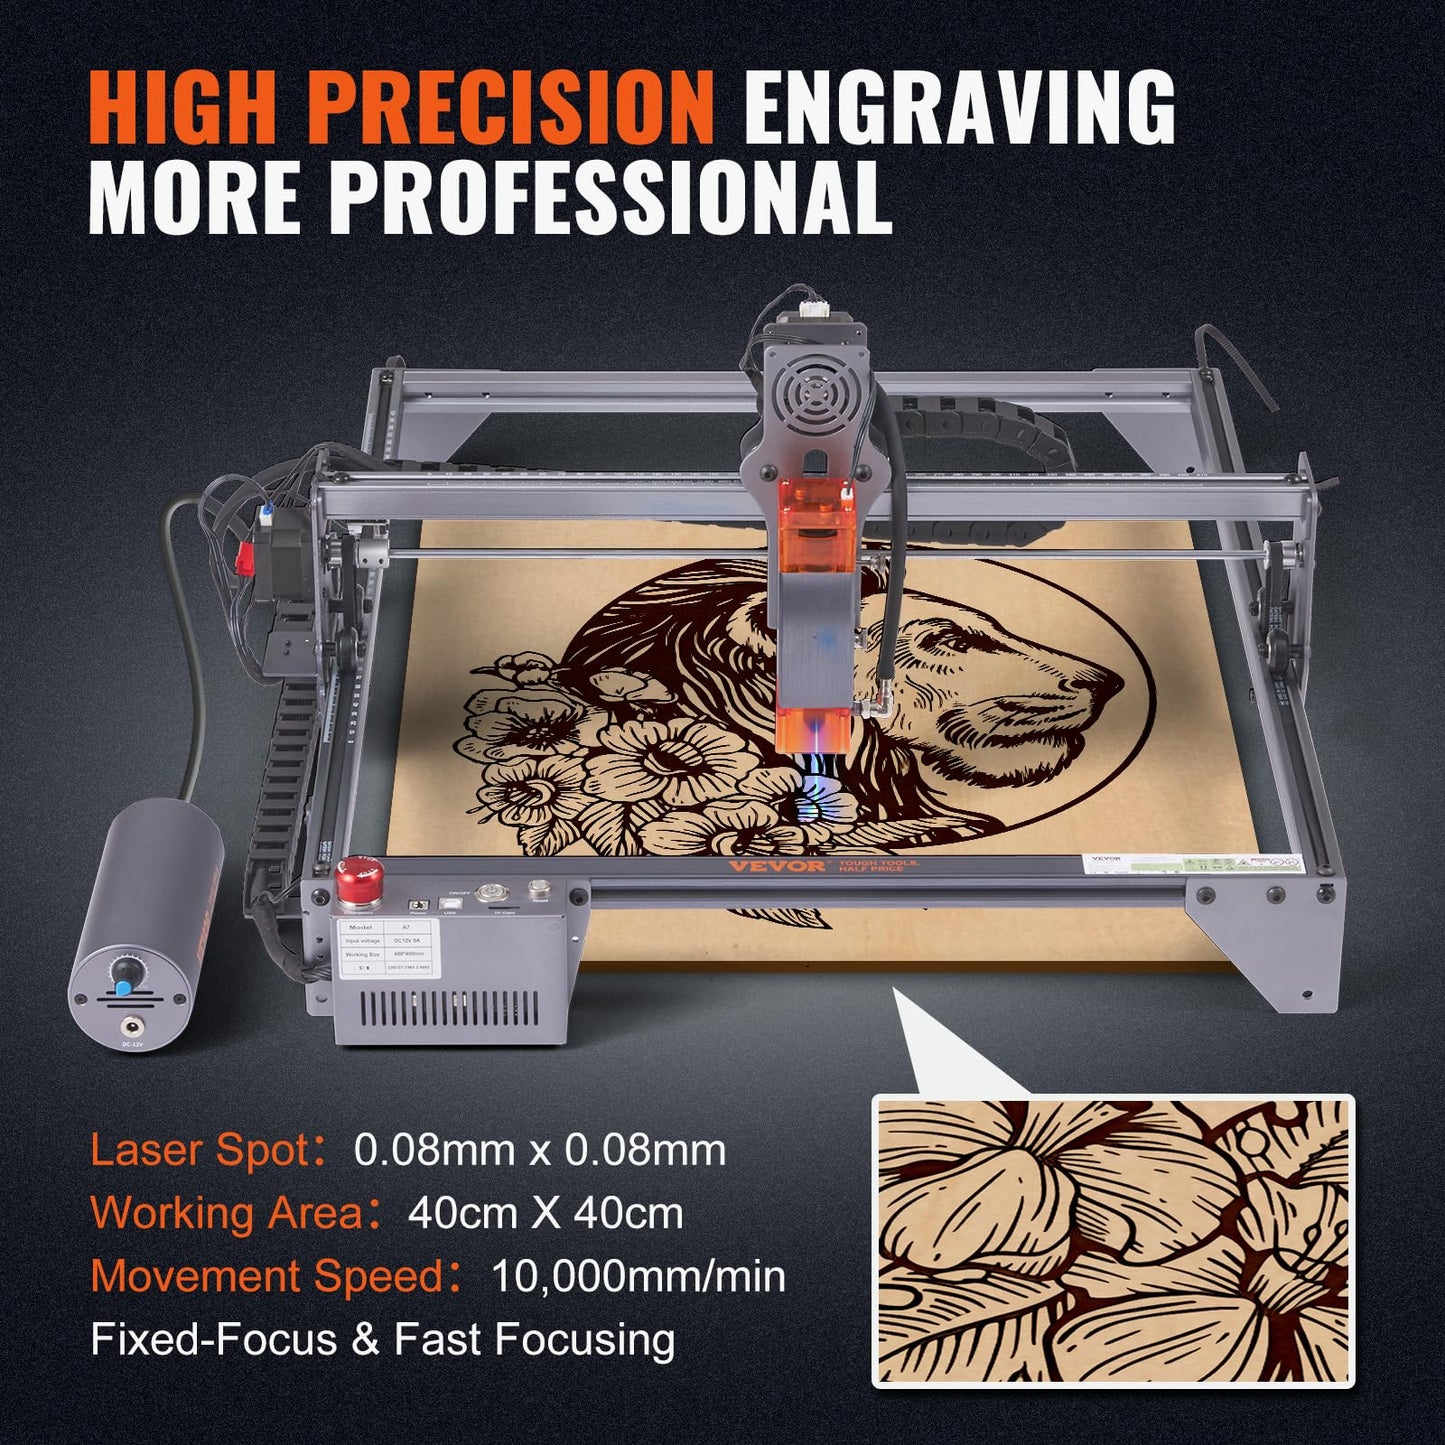 VEVOR, 10W Output Engraving Machine, 15.7" x 15.7" Large Working Area 10000mm/min Movement Speed, Compressed Spot with Eye Protection, Laser Cutter